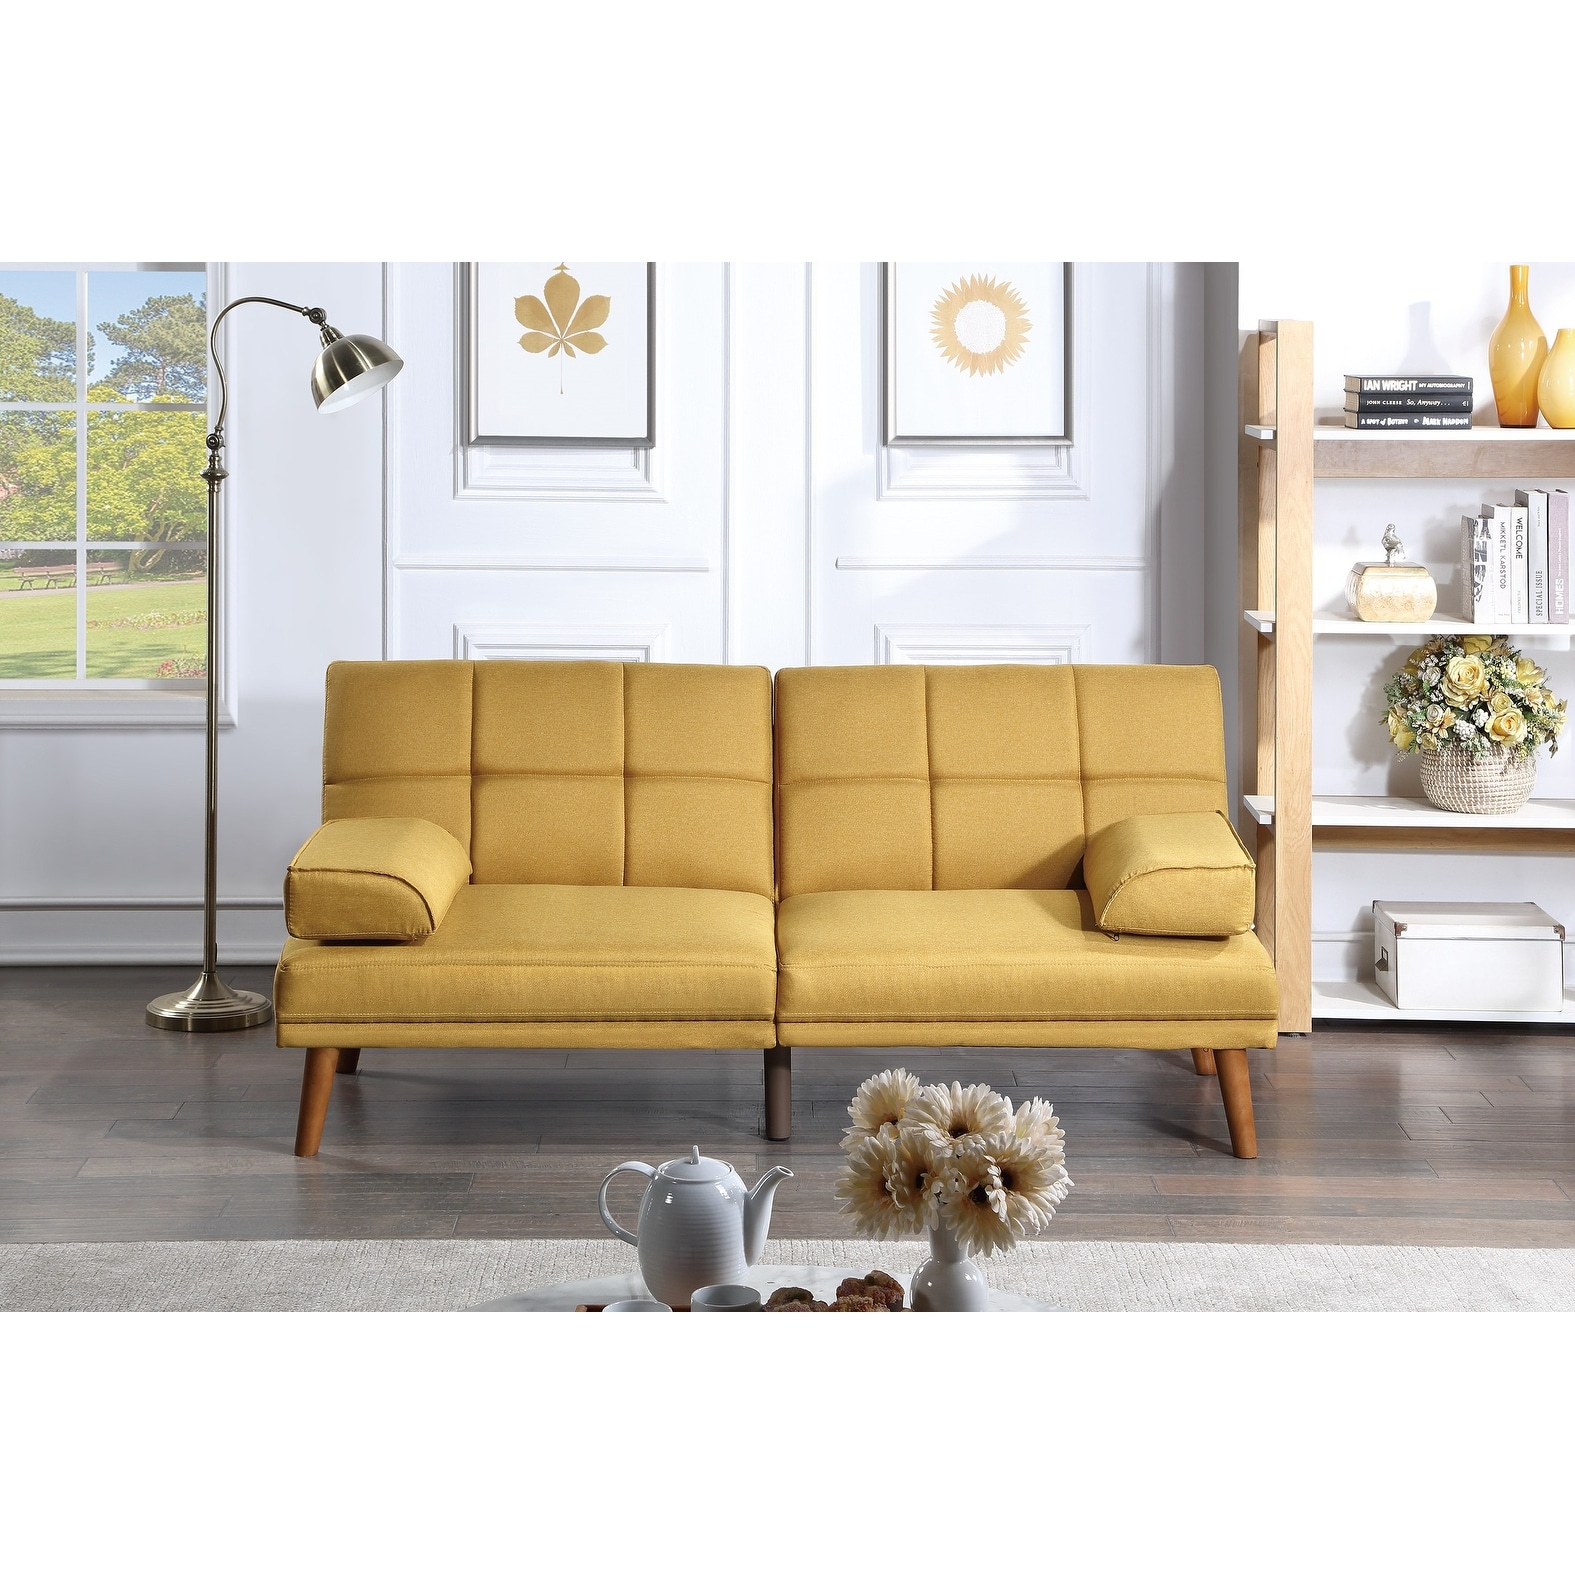 Calnod Mustard Polyfiber Adjustable Tufted Sofa Living Room Solid wood Legs Comfort Couch